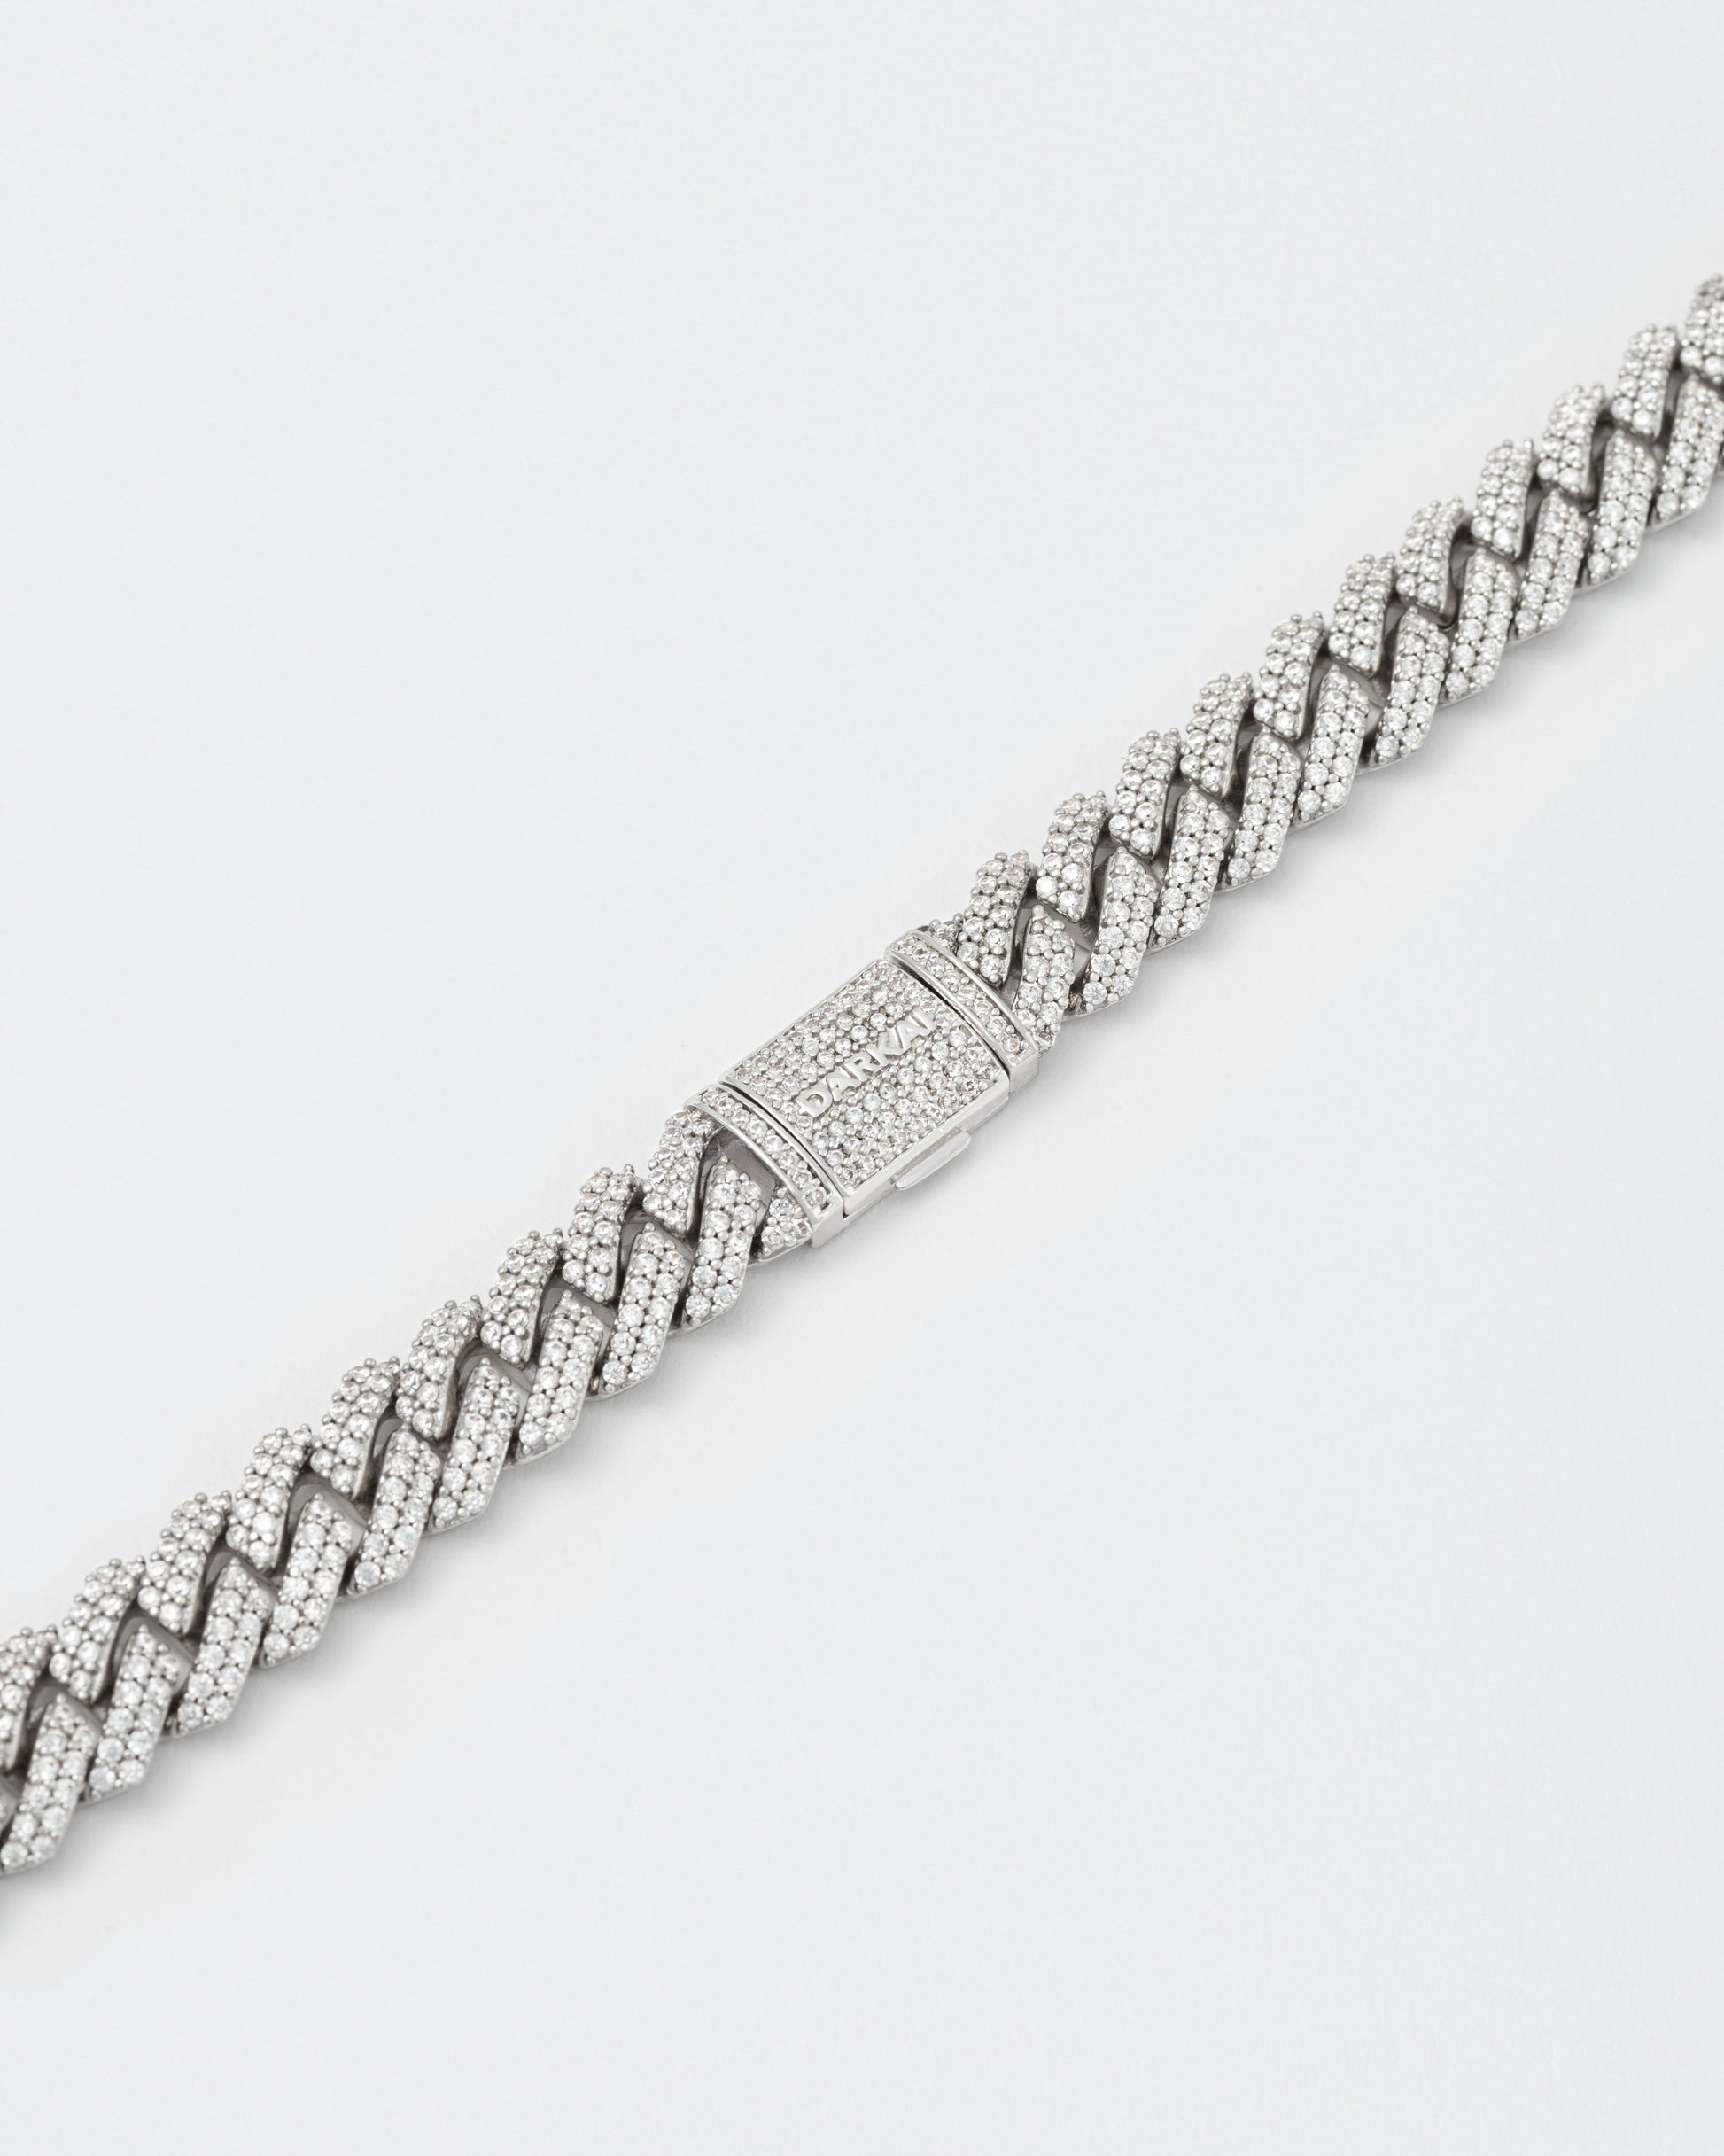 detail of clasp of 18k white gold coated mini prong chain necklace with hand-set micropavé stones in white